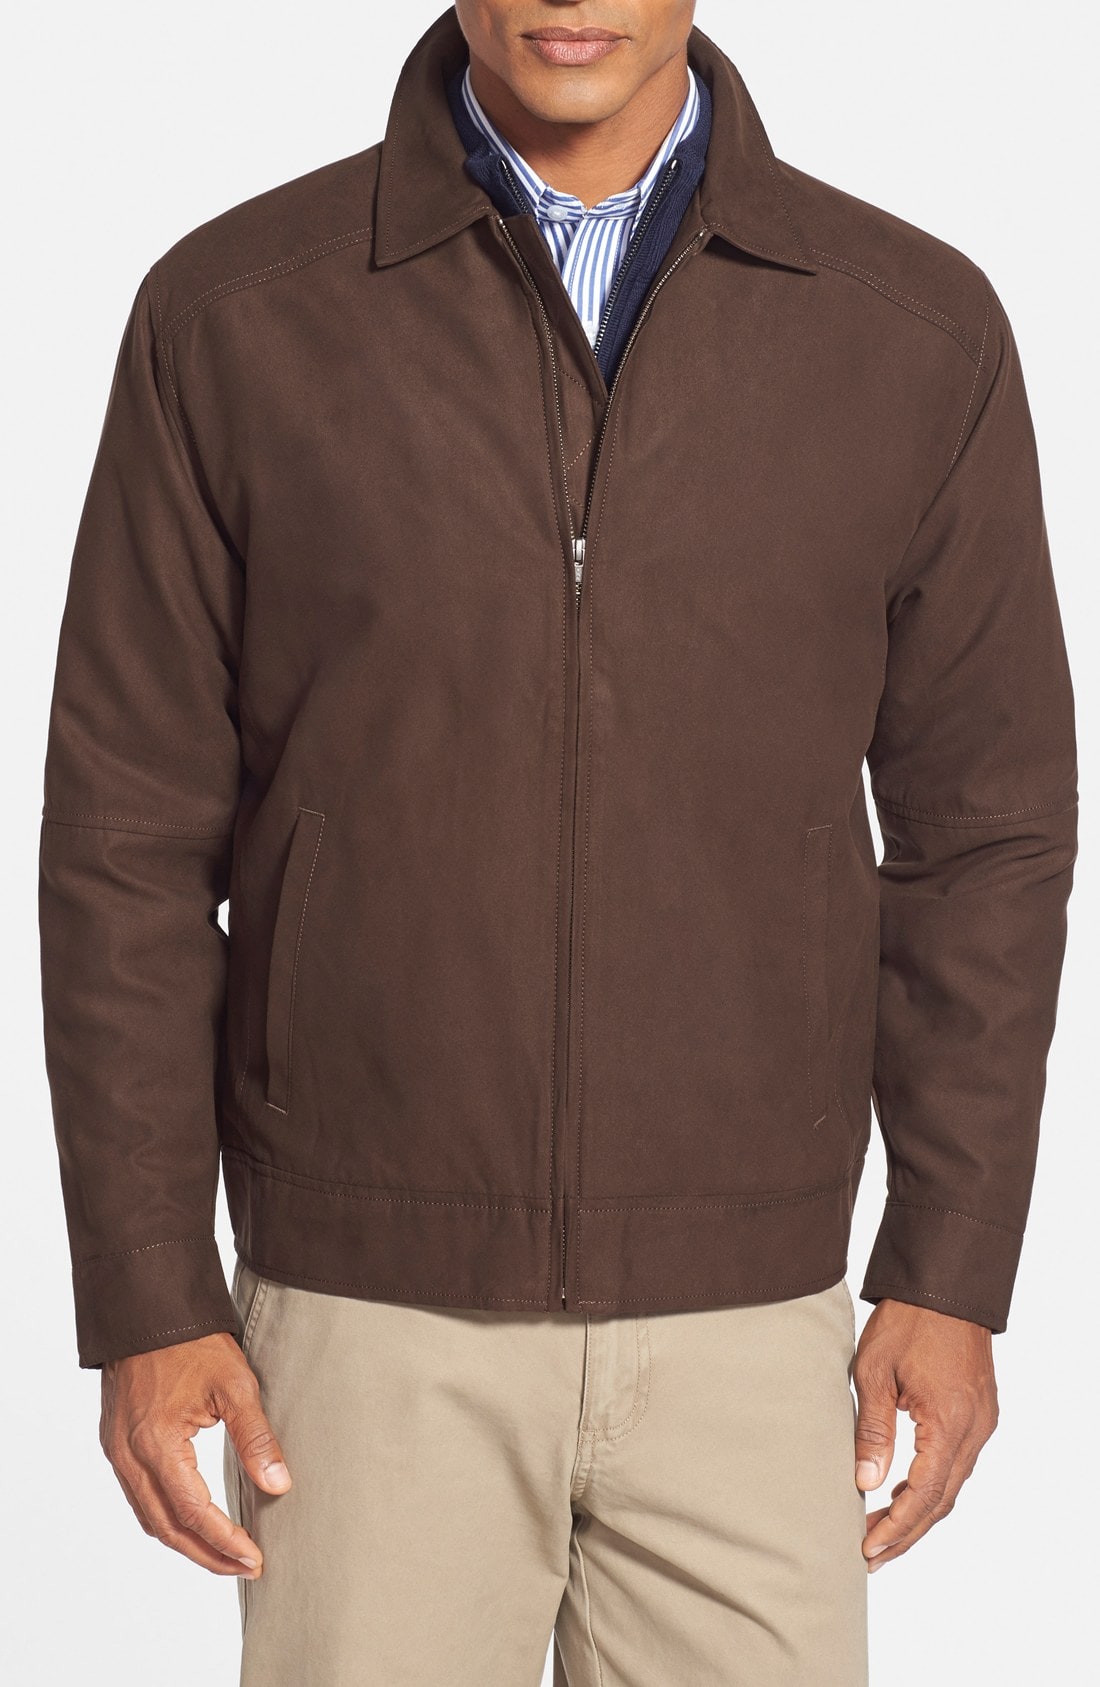 Cutter & Buck 'Roosevelt' Classic Fit Water Resistant Full Zip Jacket (Online Only)